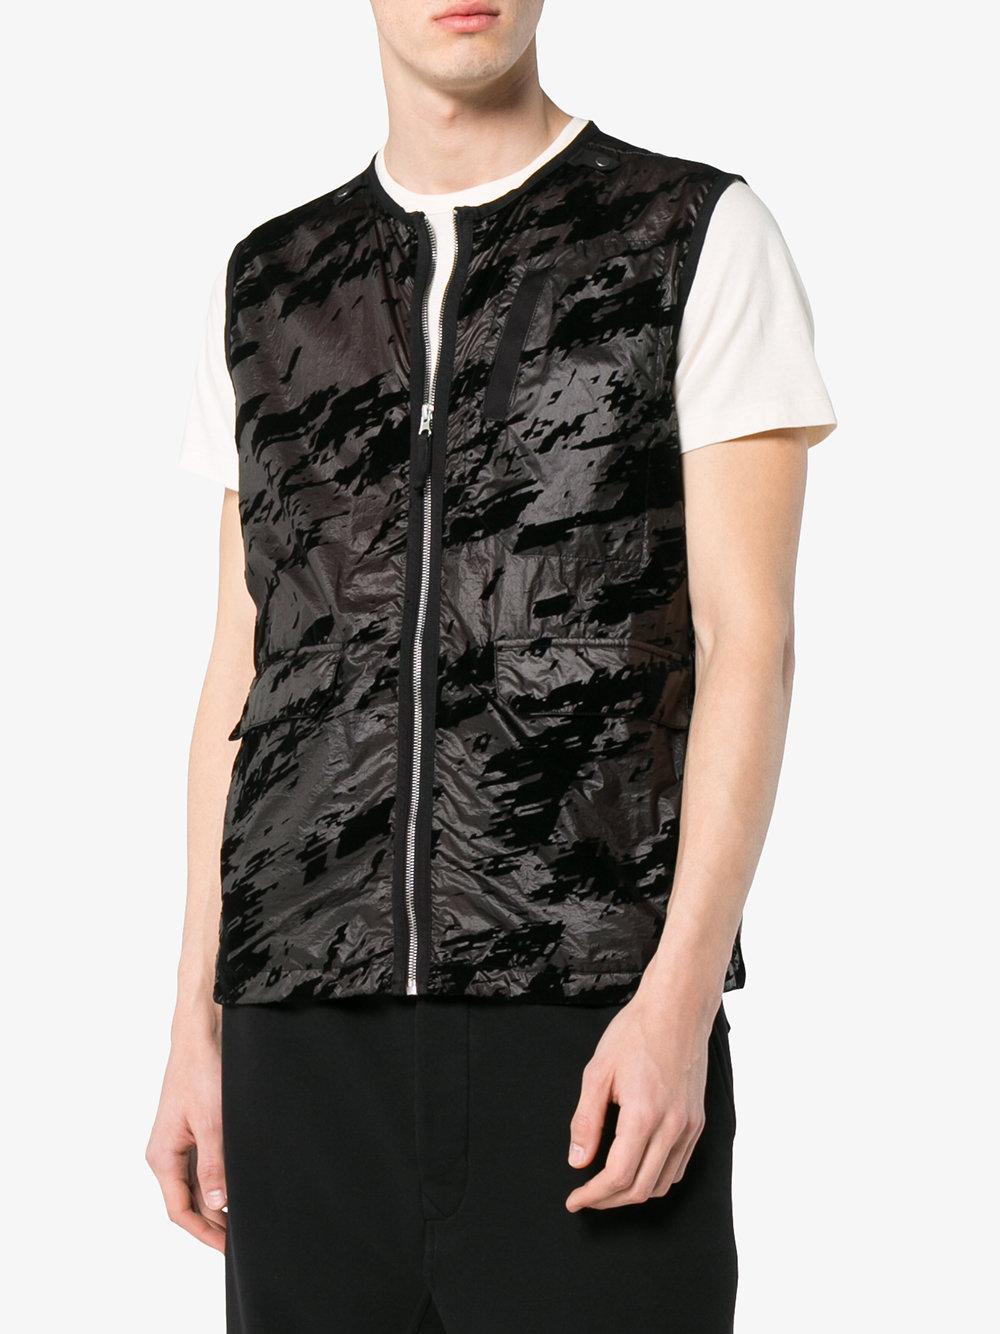 Stone Island Synthetic Black Camouflage Gilet for Men - Lyst